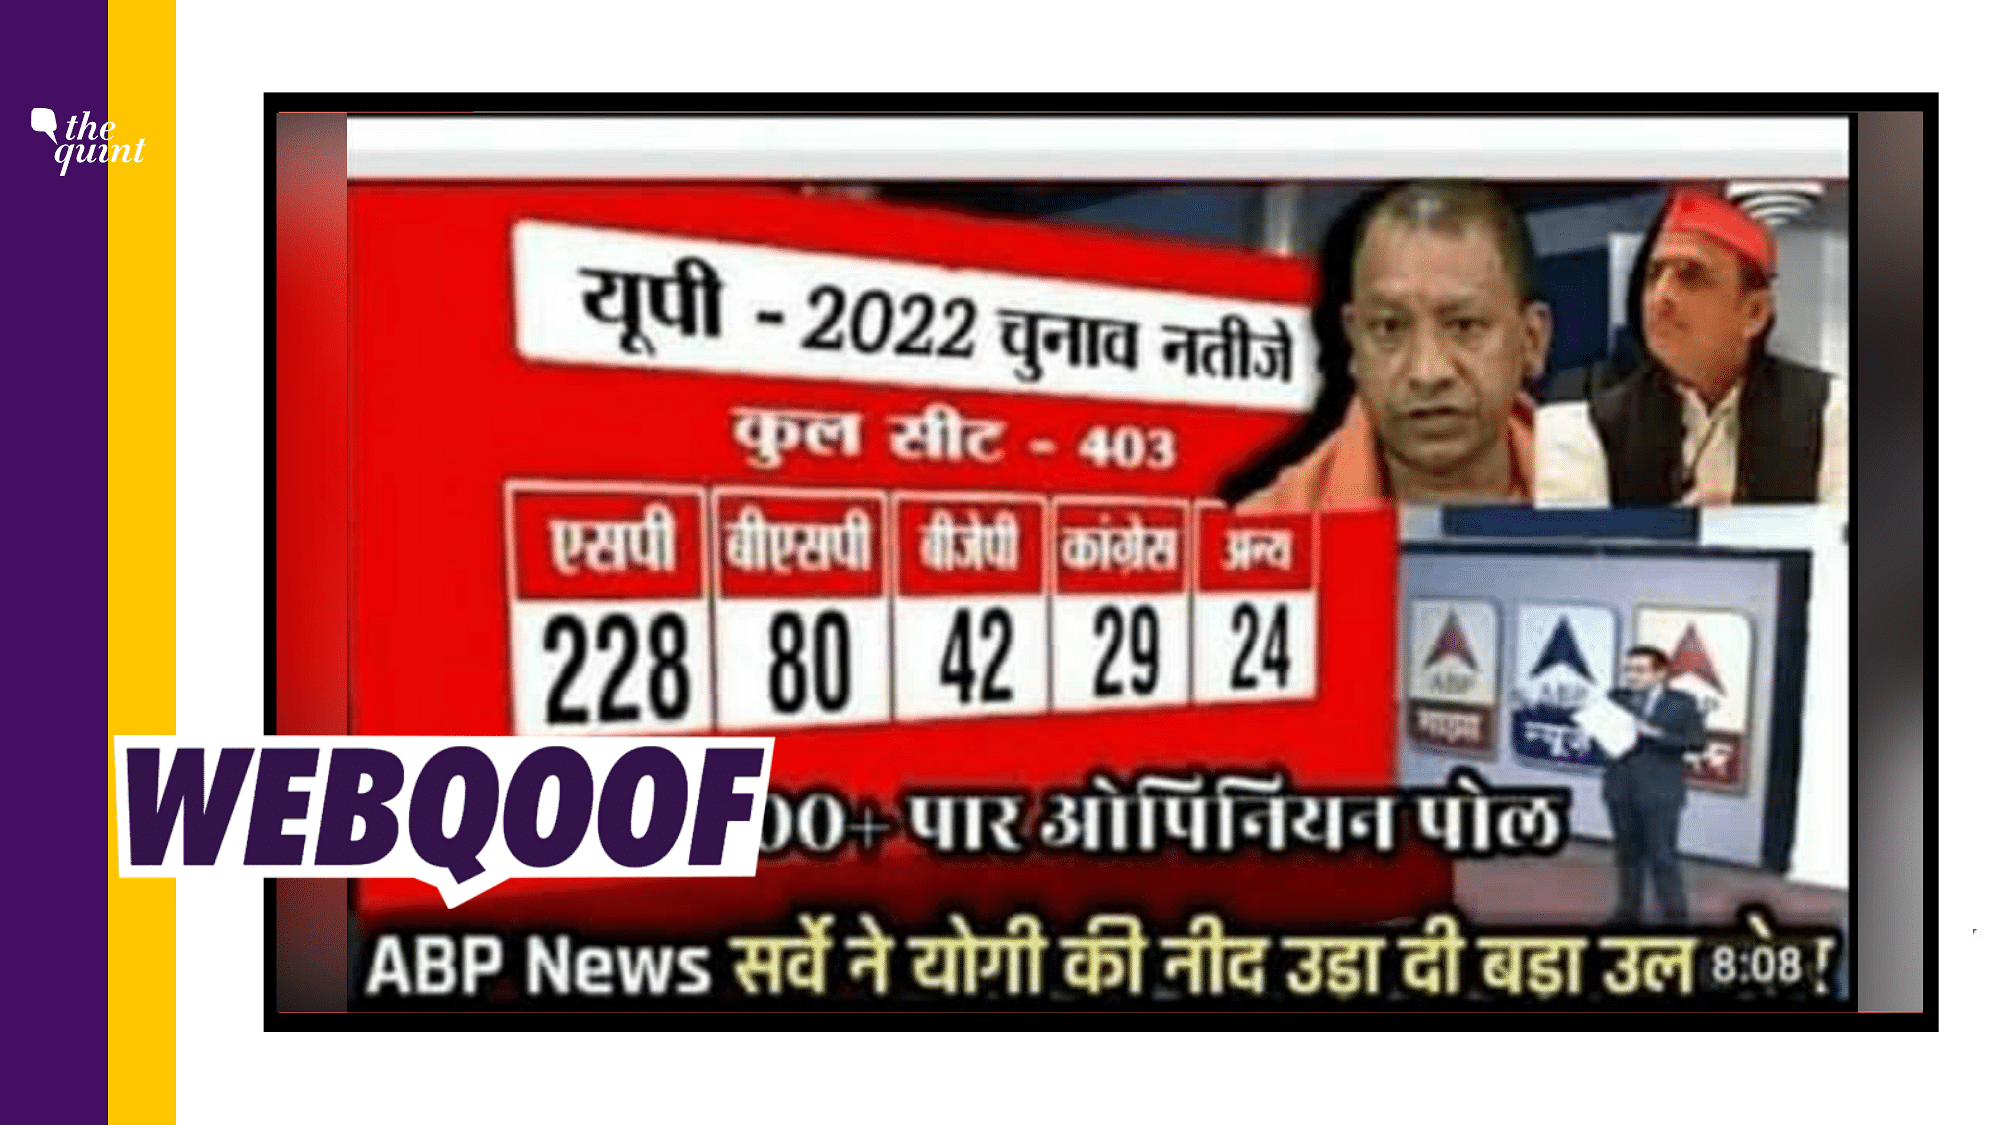 <div class="paragraphs"><p>Fact-Check | The morphed image of a 2016 bullein published by <em>ABP News</em> has been shared as a recent one ahead of the 2022 Uttar Pradesh elections.&nbsp;</p></div>